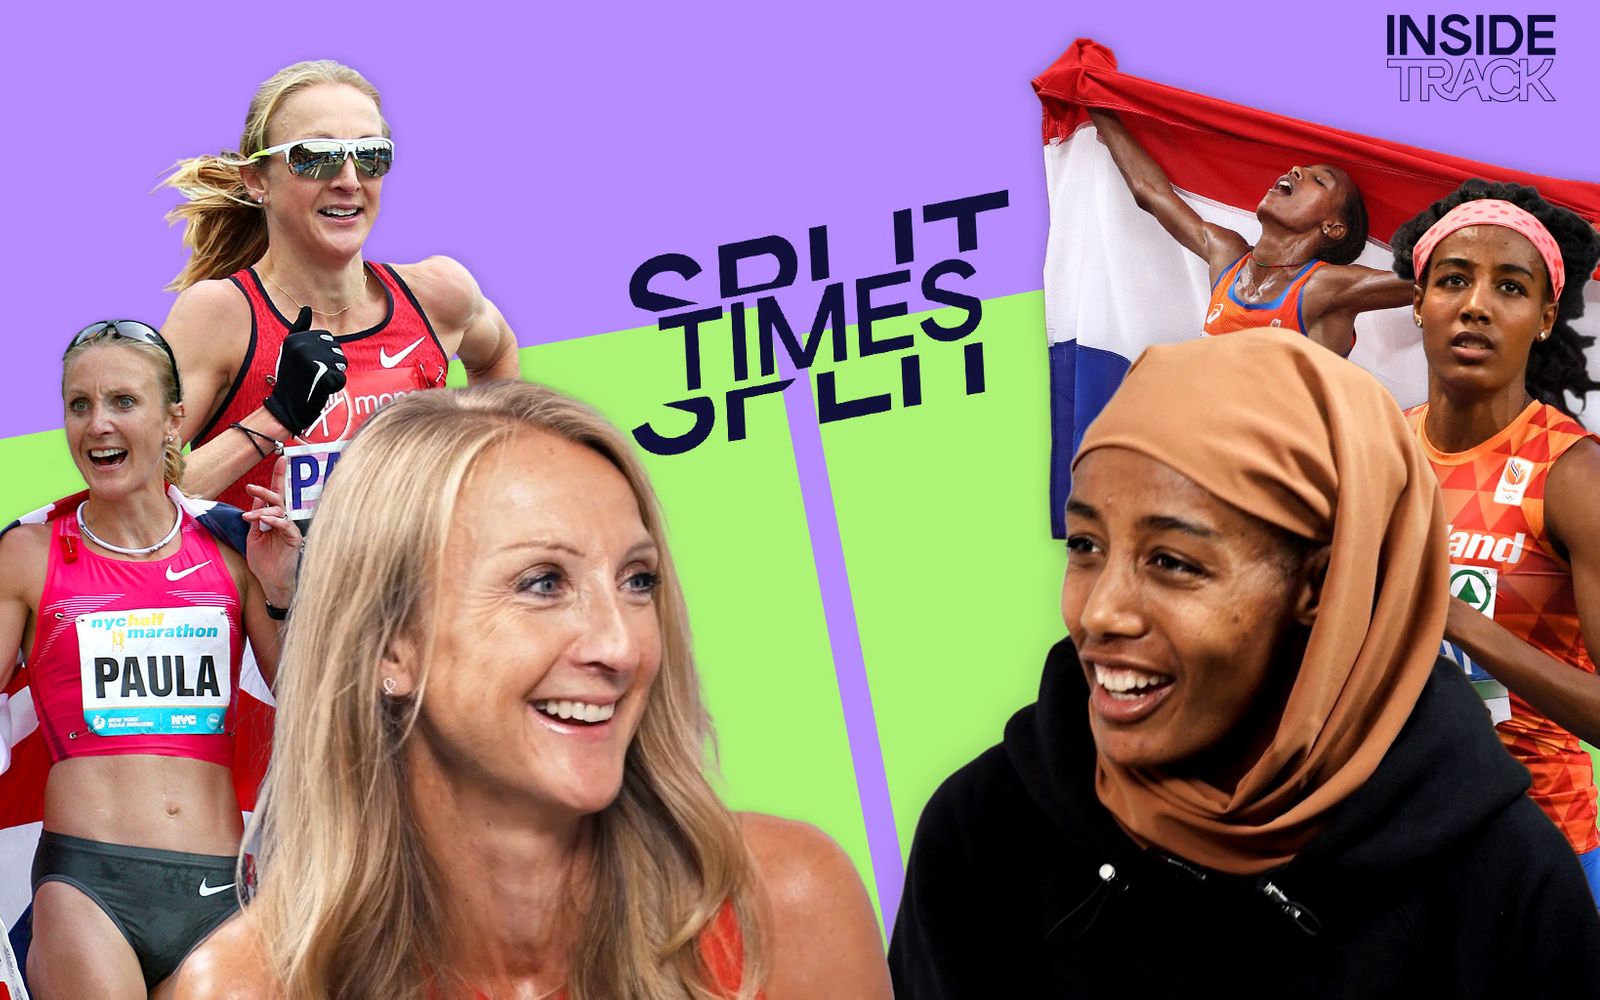 Split Times Episode 2 graphic with Paula Radcliffe and Sifan Hassan